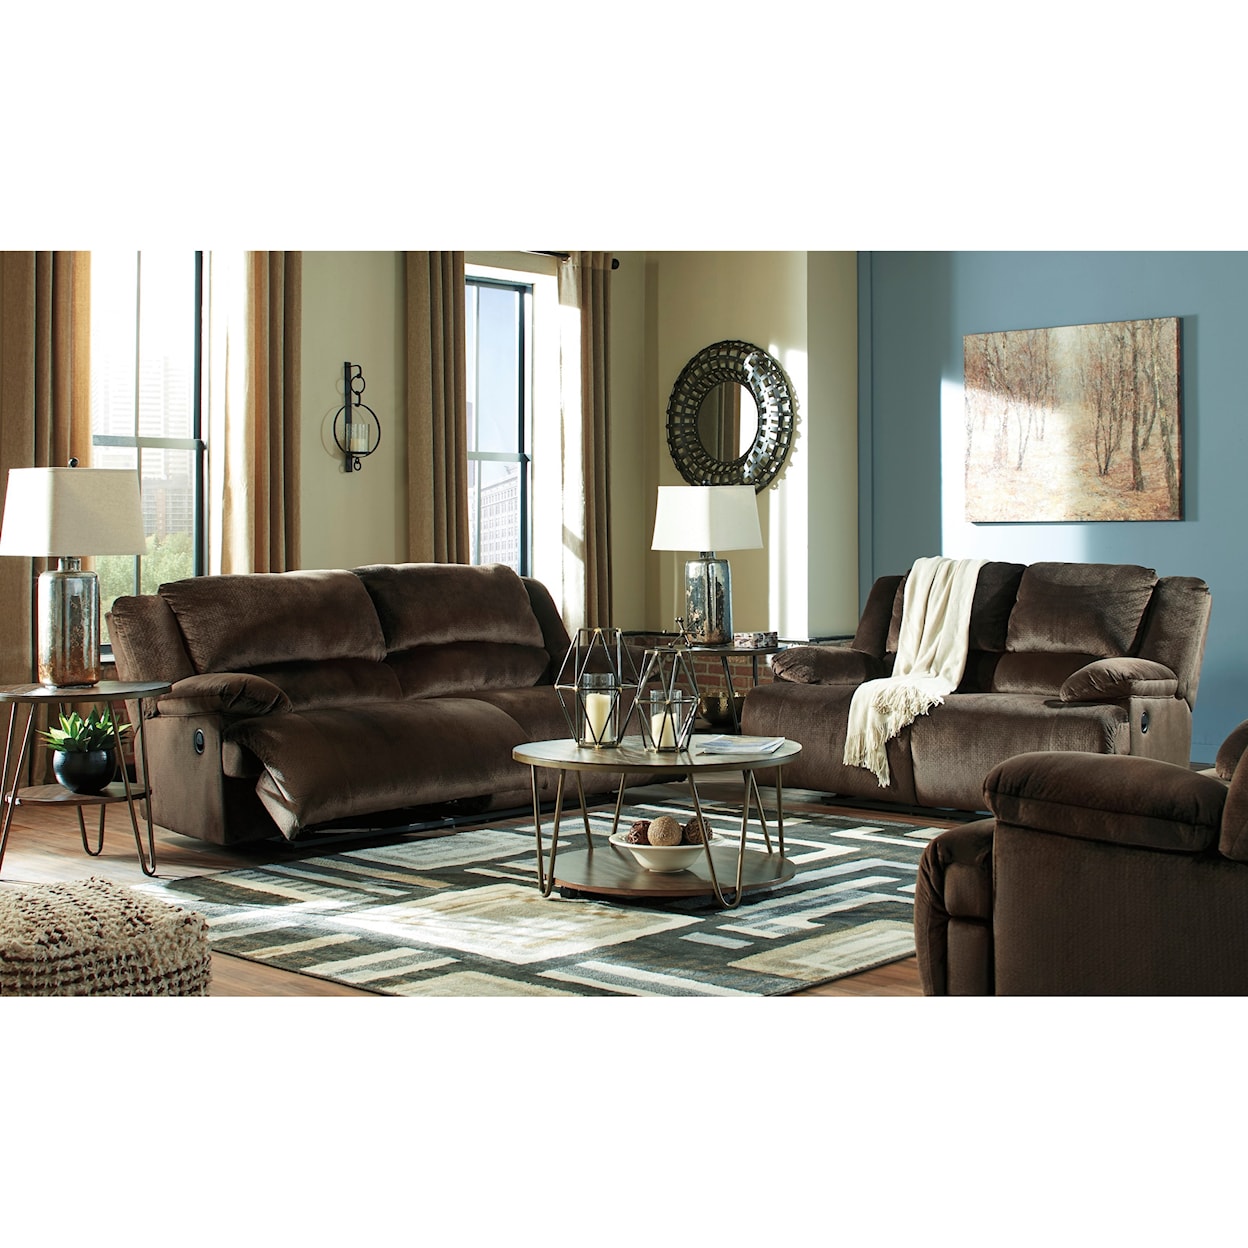 Signature Design by Ashley Clonmel Reclining Living Room Group